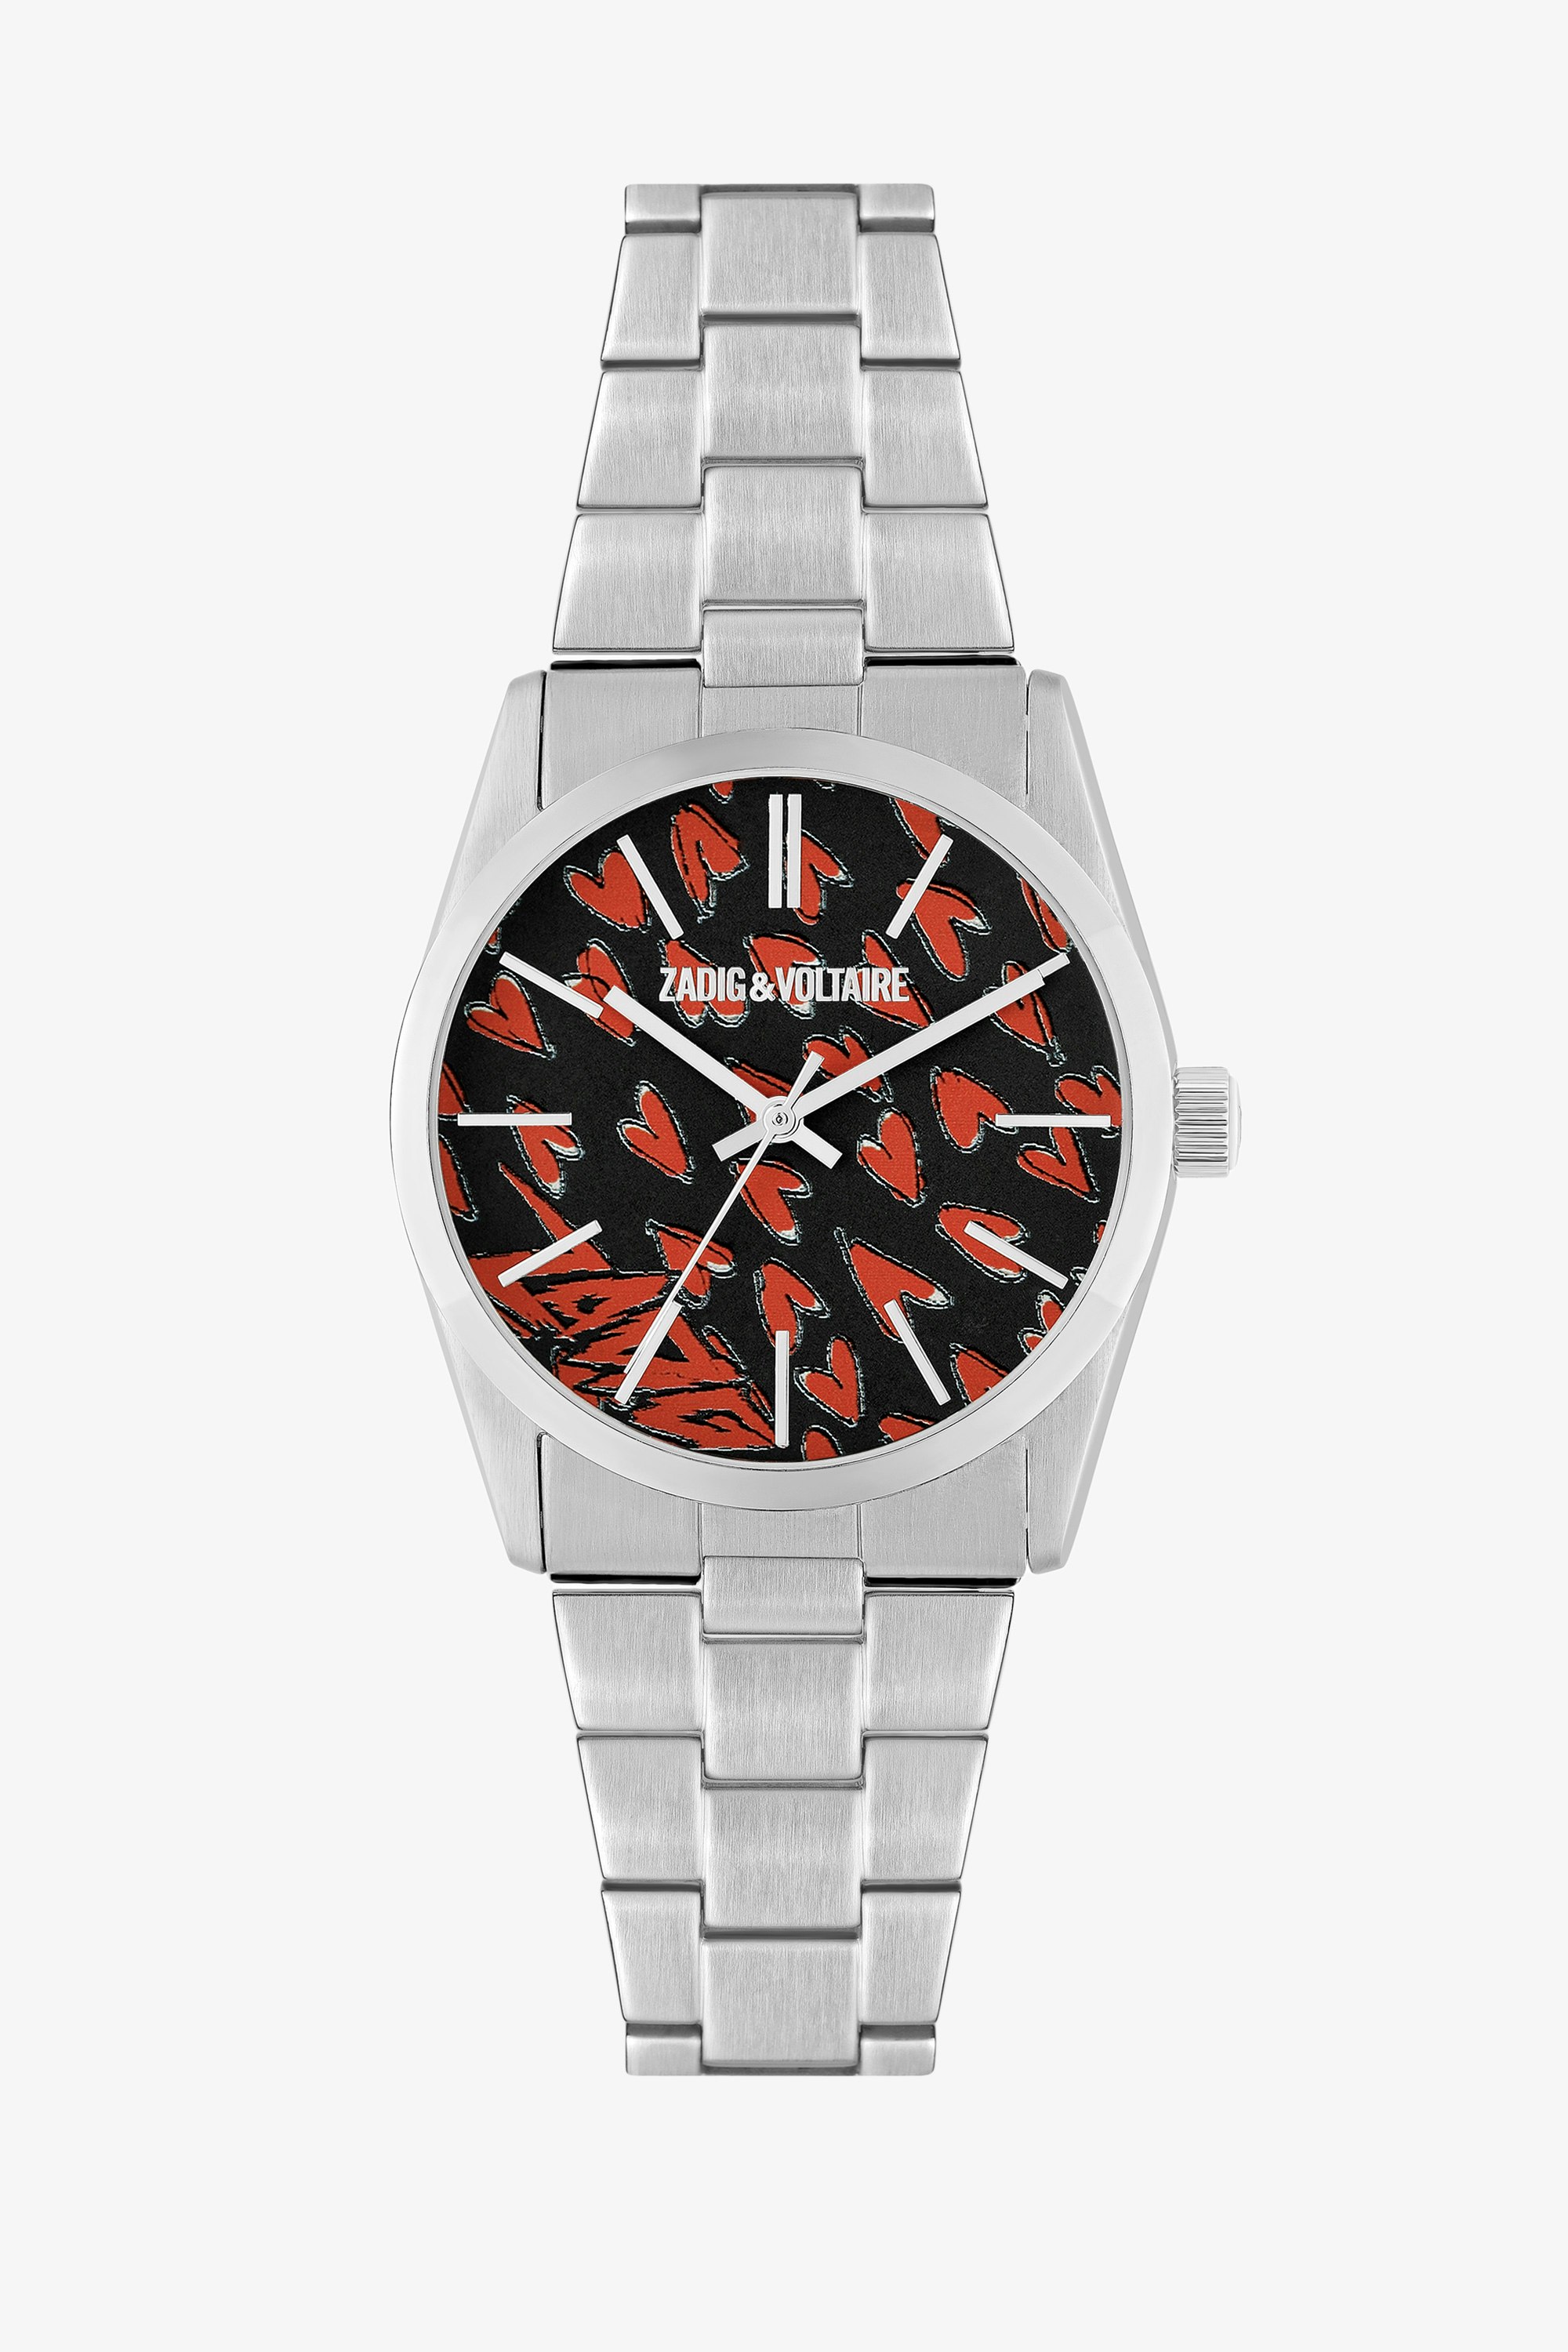 Fusion Heart ウォッチ Women’s silver-tone steel watch with dial featuring red hearts